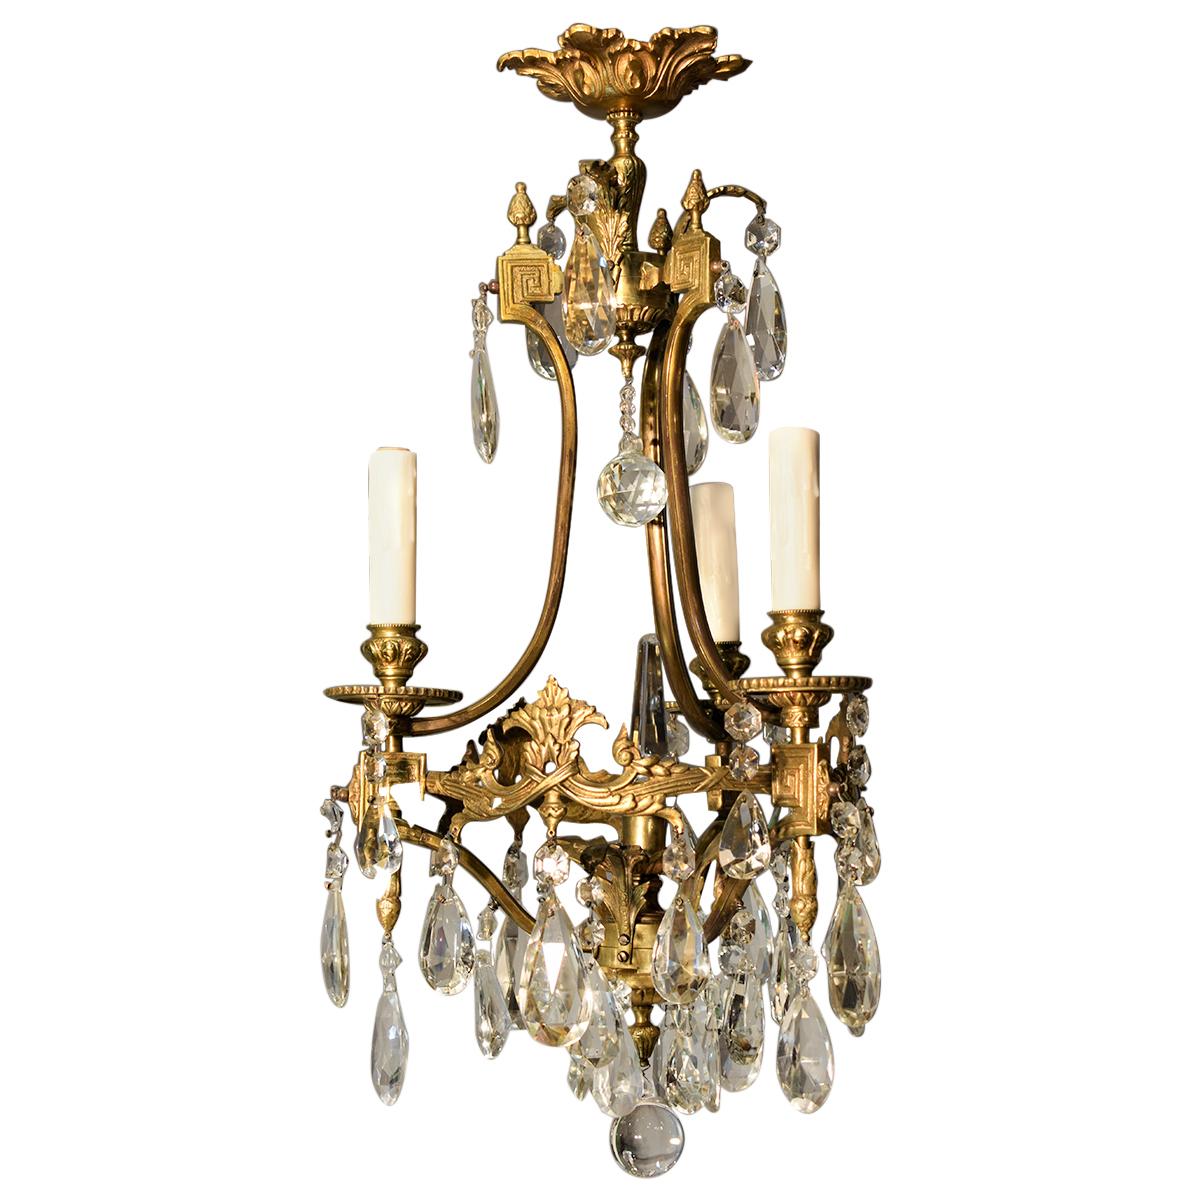 A fine gilt bronze and crystal chandelier by Baccarat.
France, circa 1920. 3-light
Dimensions: Height 26 1/2